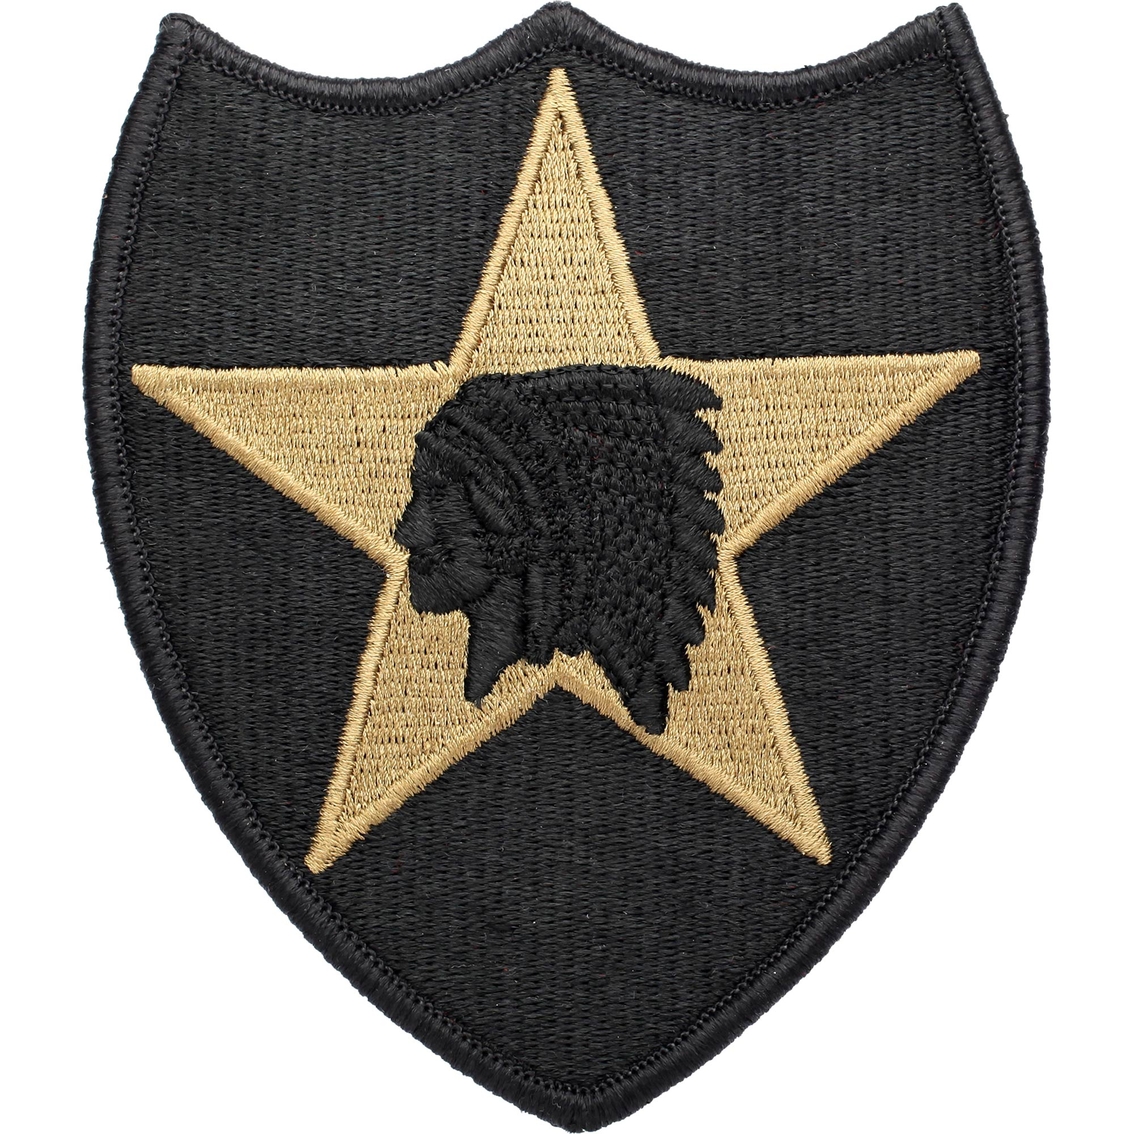 Infantry Army Patches - Army Military